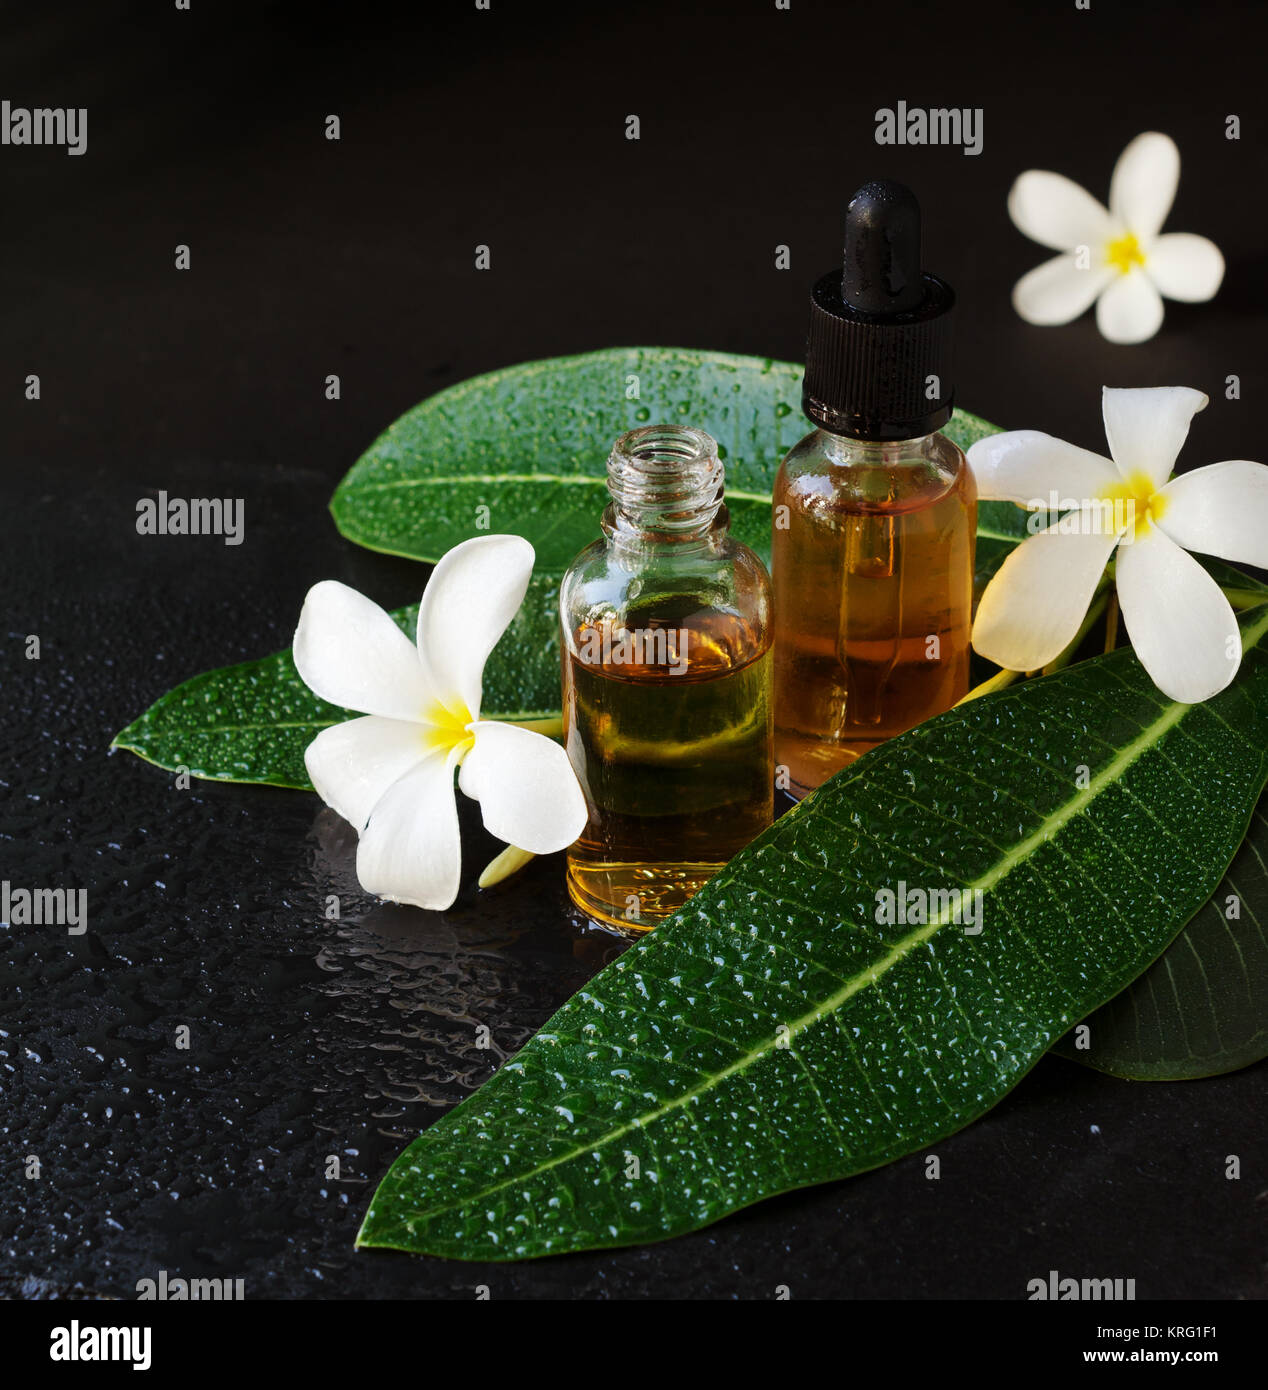 small glass jars with oil and Frangipani Plumeria patchouli flowers for spa treatments on a black background, selective focus Stock Photo